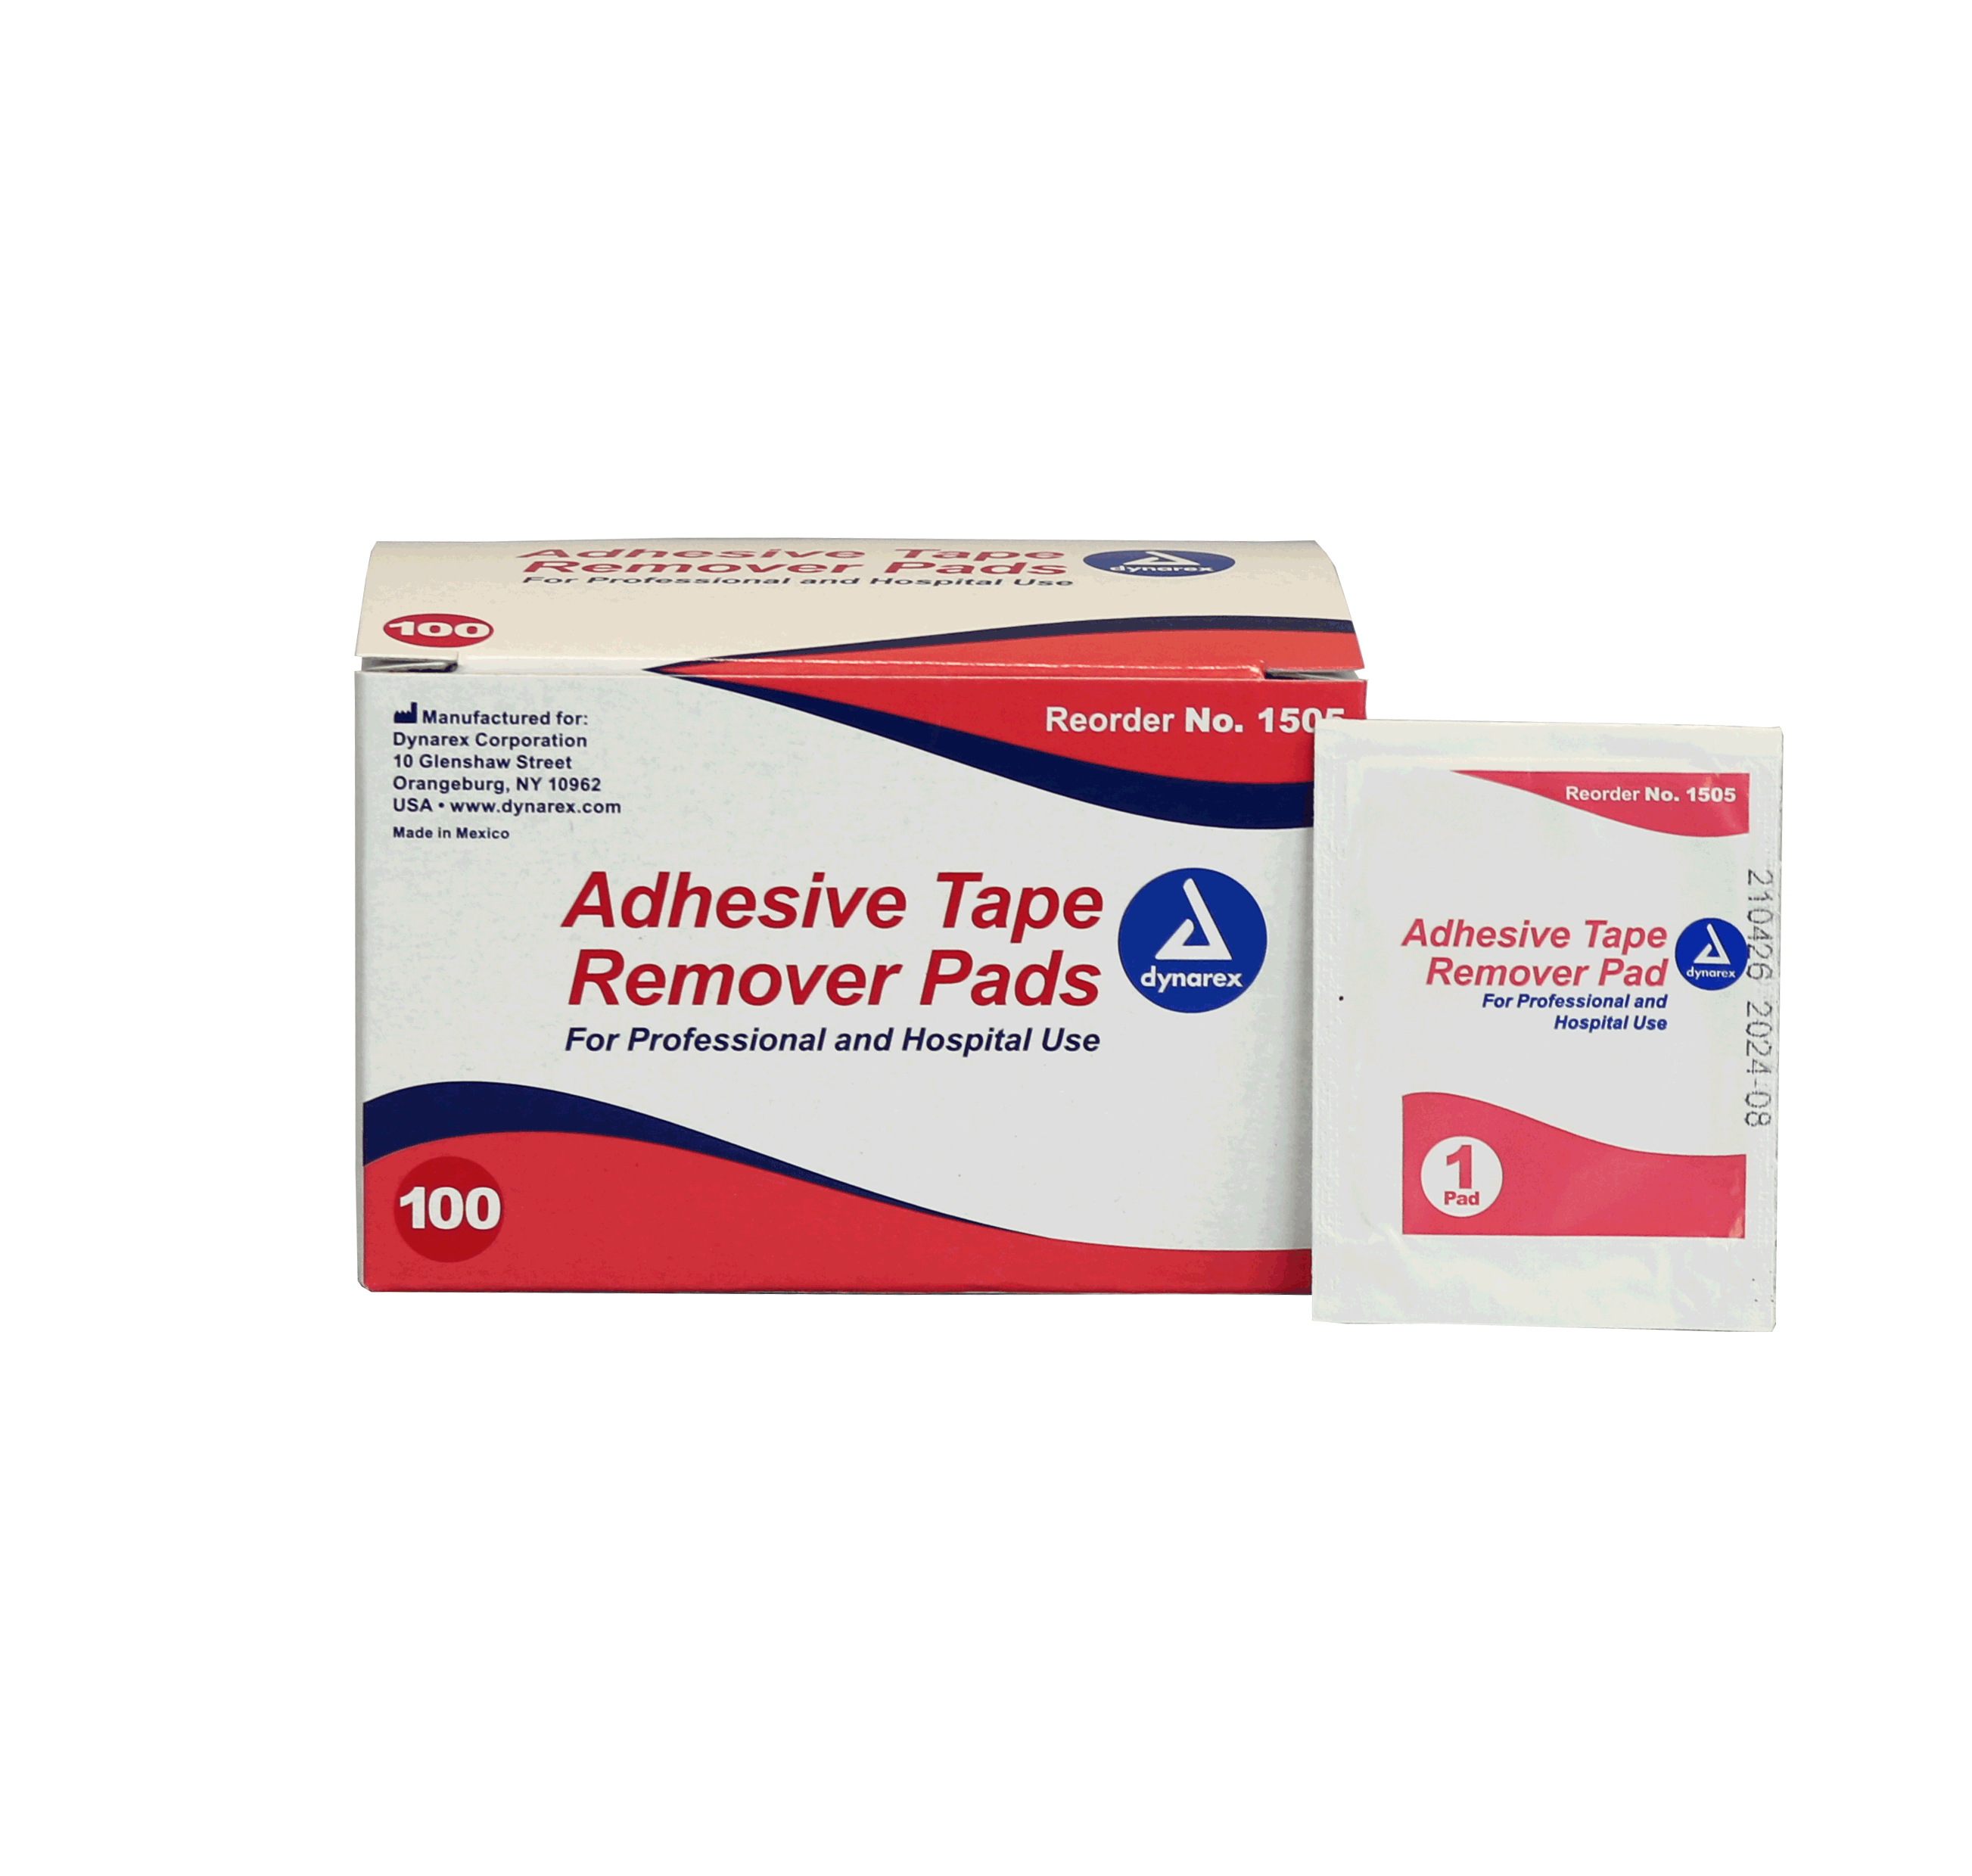 Definitie Ritmisch kolonie PDI Adhesive Tape Remover Pads - 100/box • First Aid Supplies Online